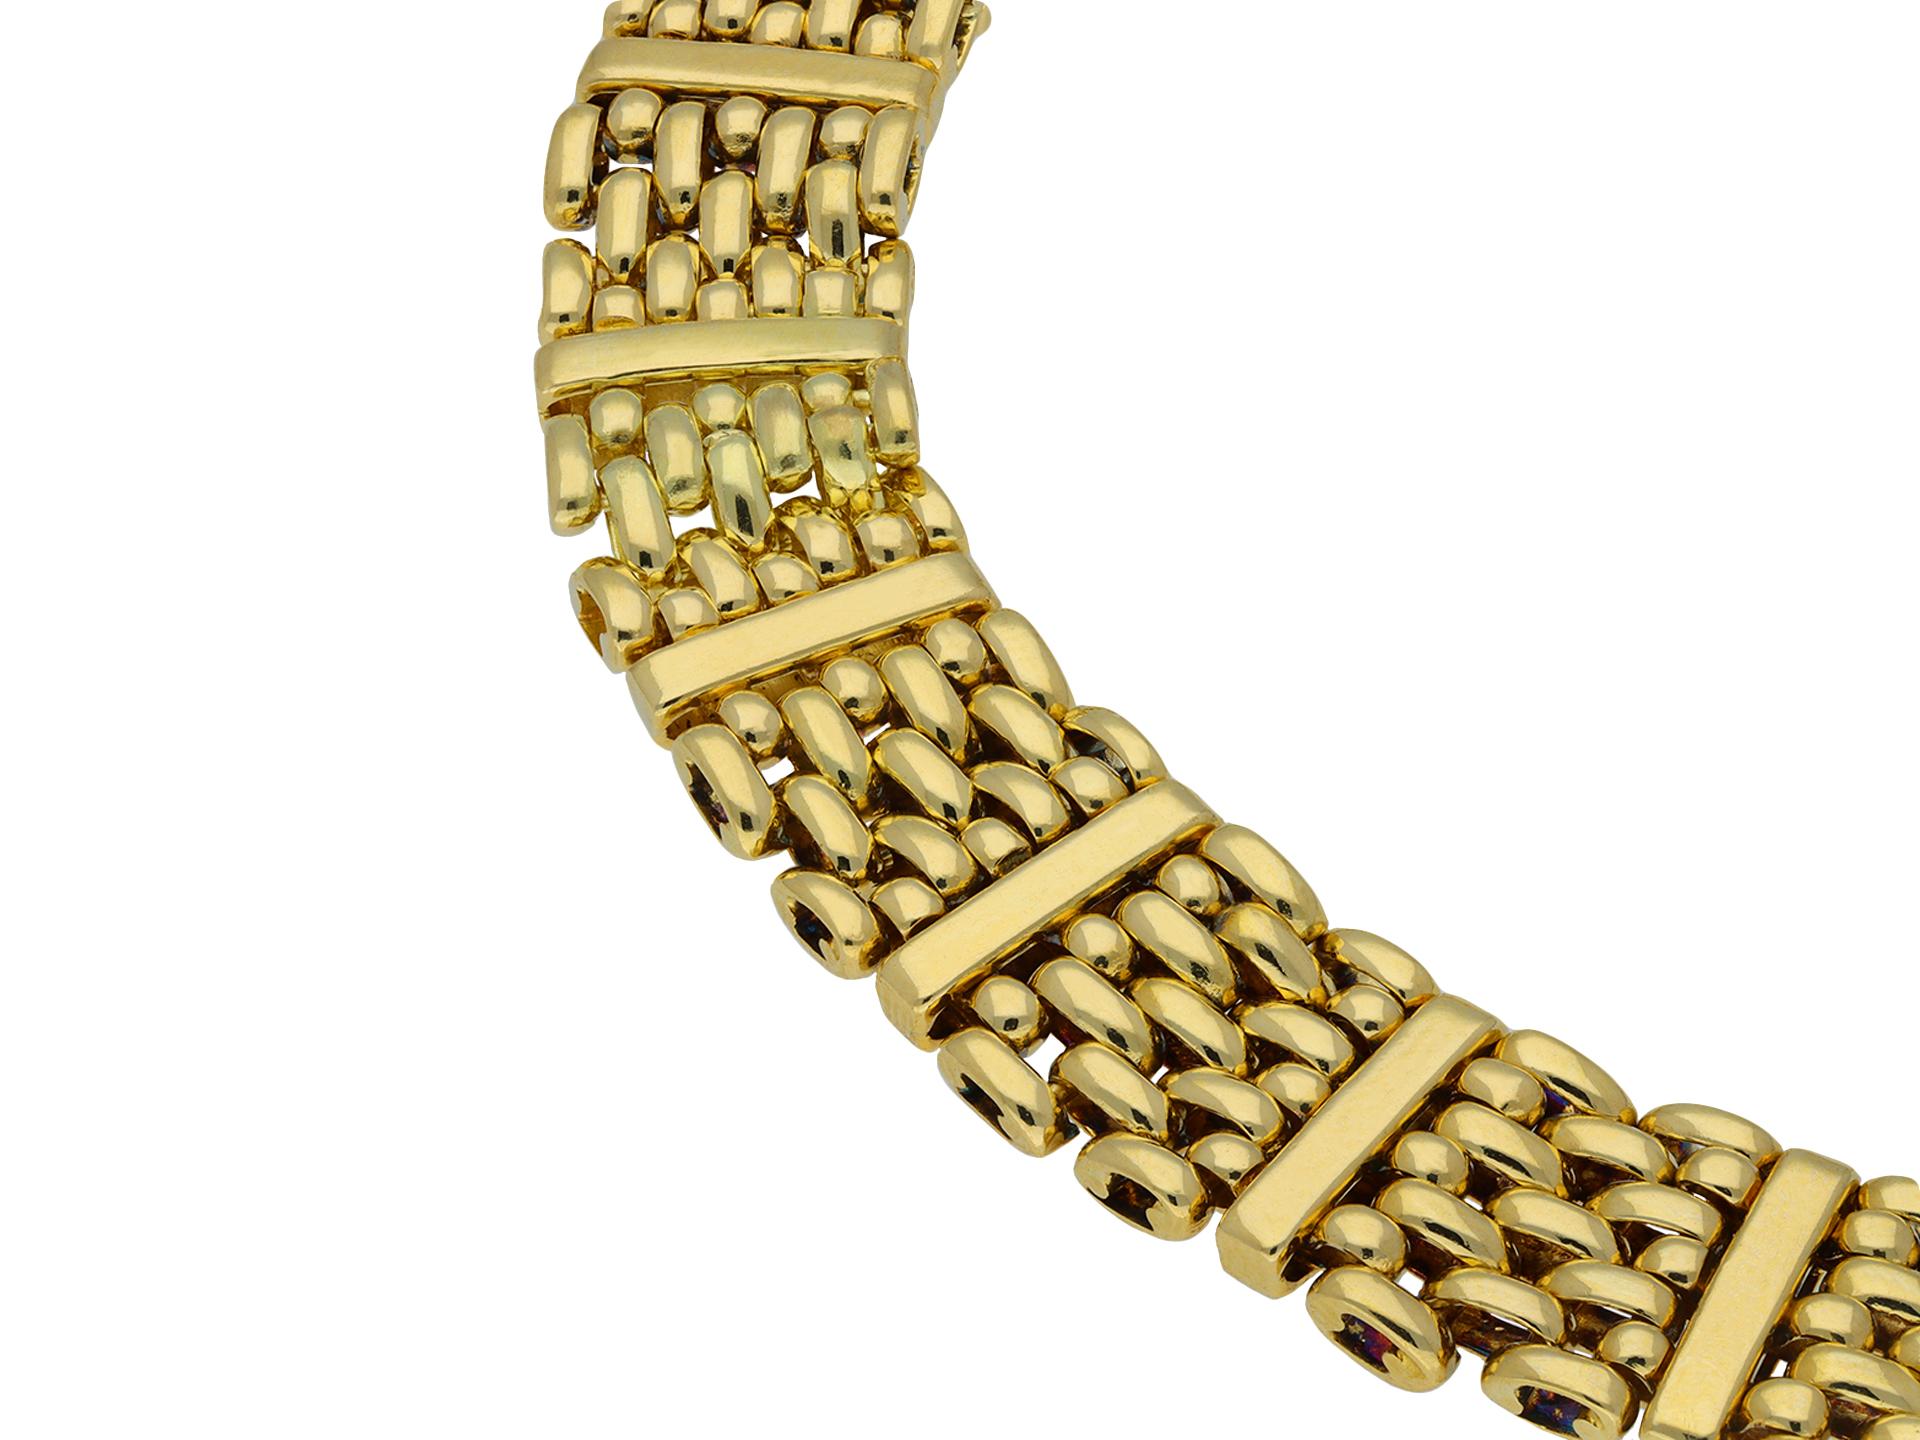 Van Cleef & Arpels gold bracelet. A yellow gold articulated bracelet comprised of sixteen sections of seven rows of horizontal tubular woven links interspersed with a vertical yellow gold bar, flowing with movement and fitted with a secure